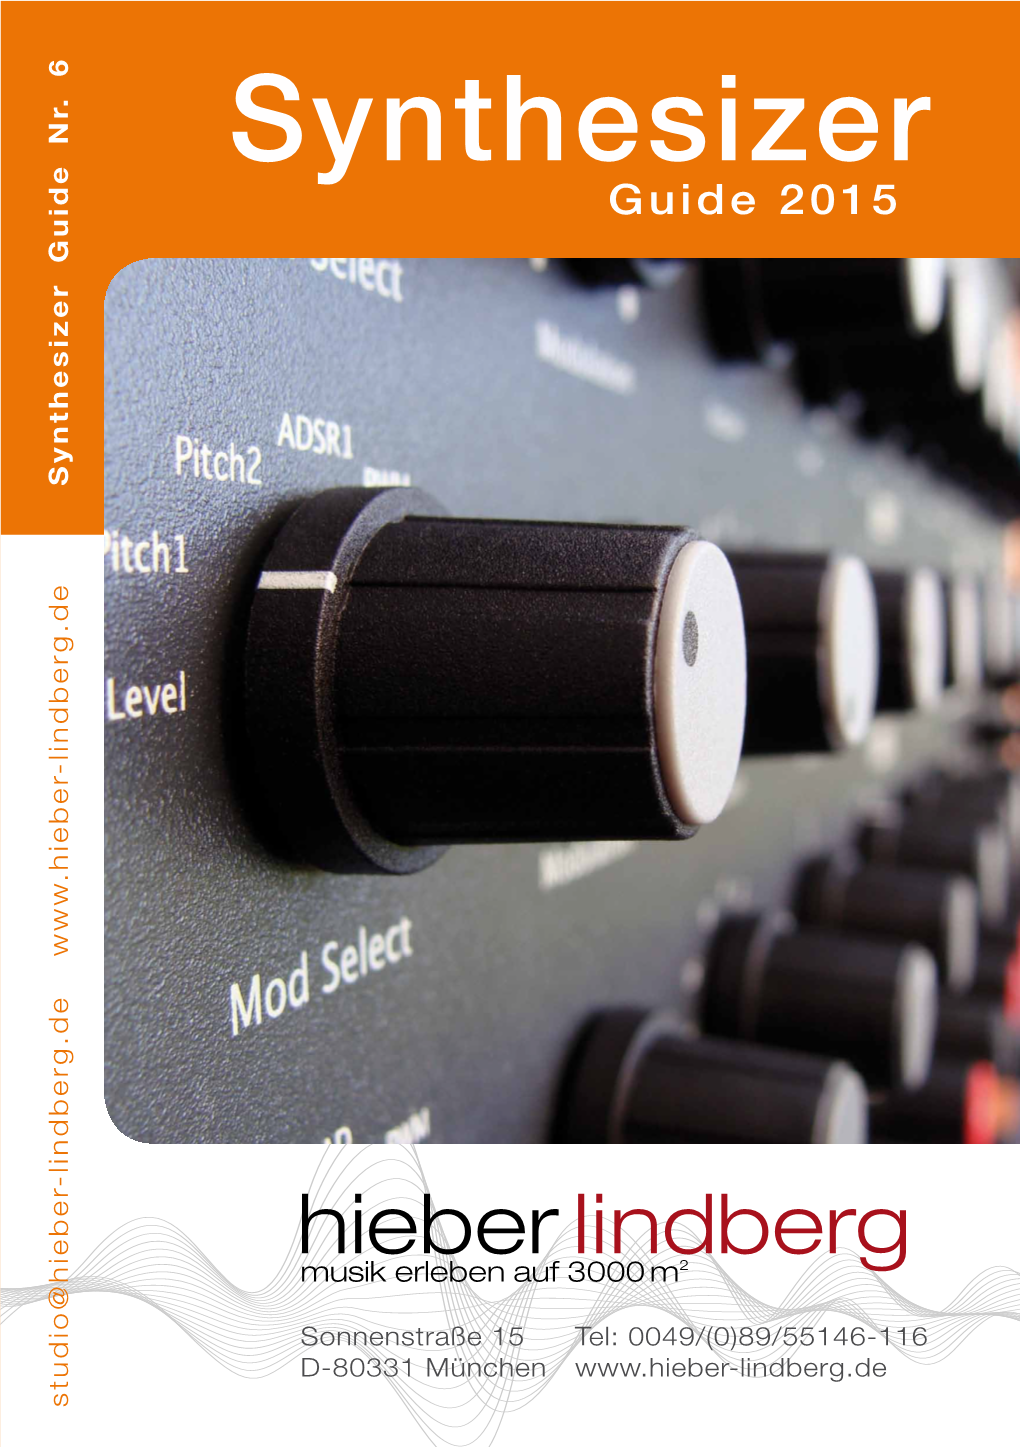 Synthesizer Guide 2015